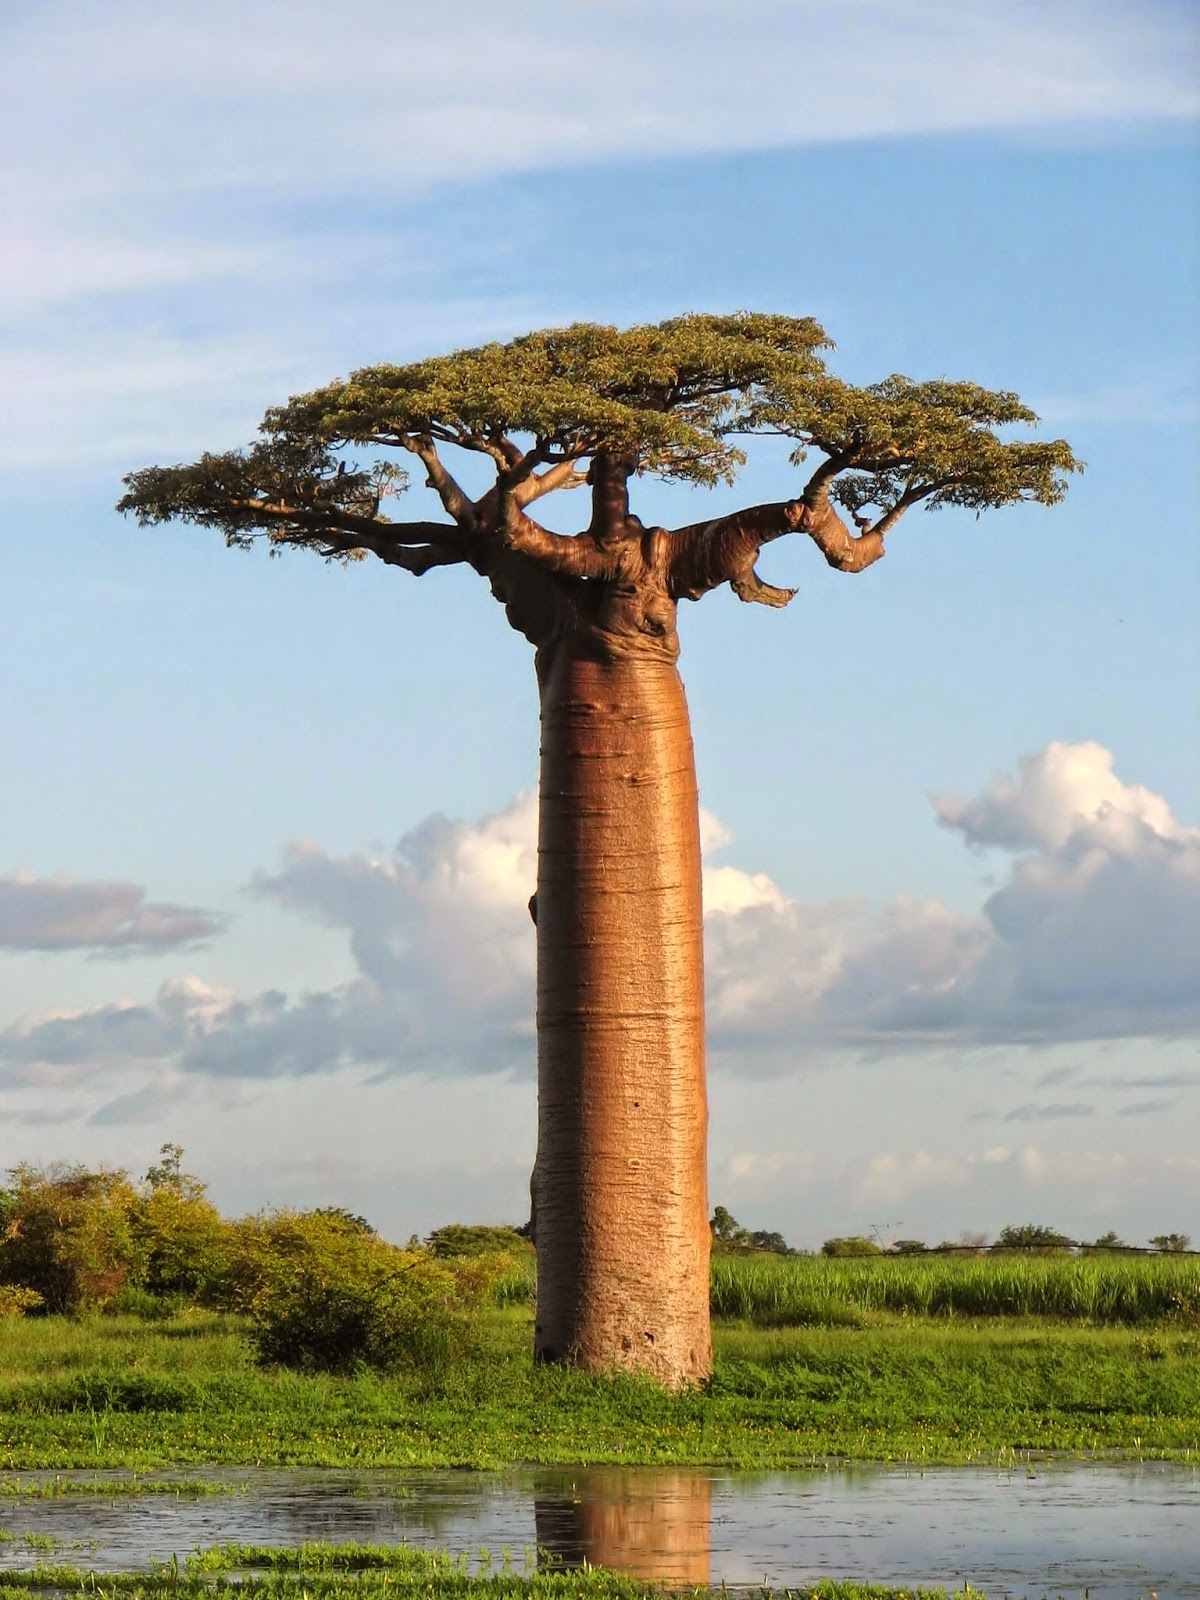 art is derived from natural "Baobab" is the Bottle Tree